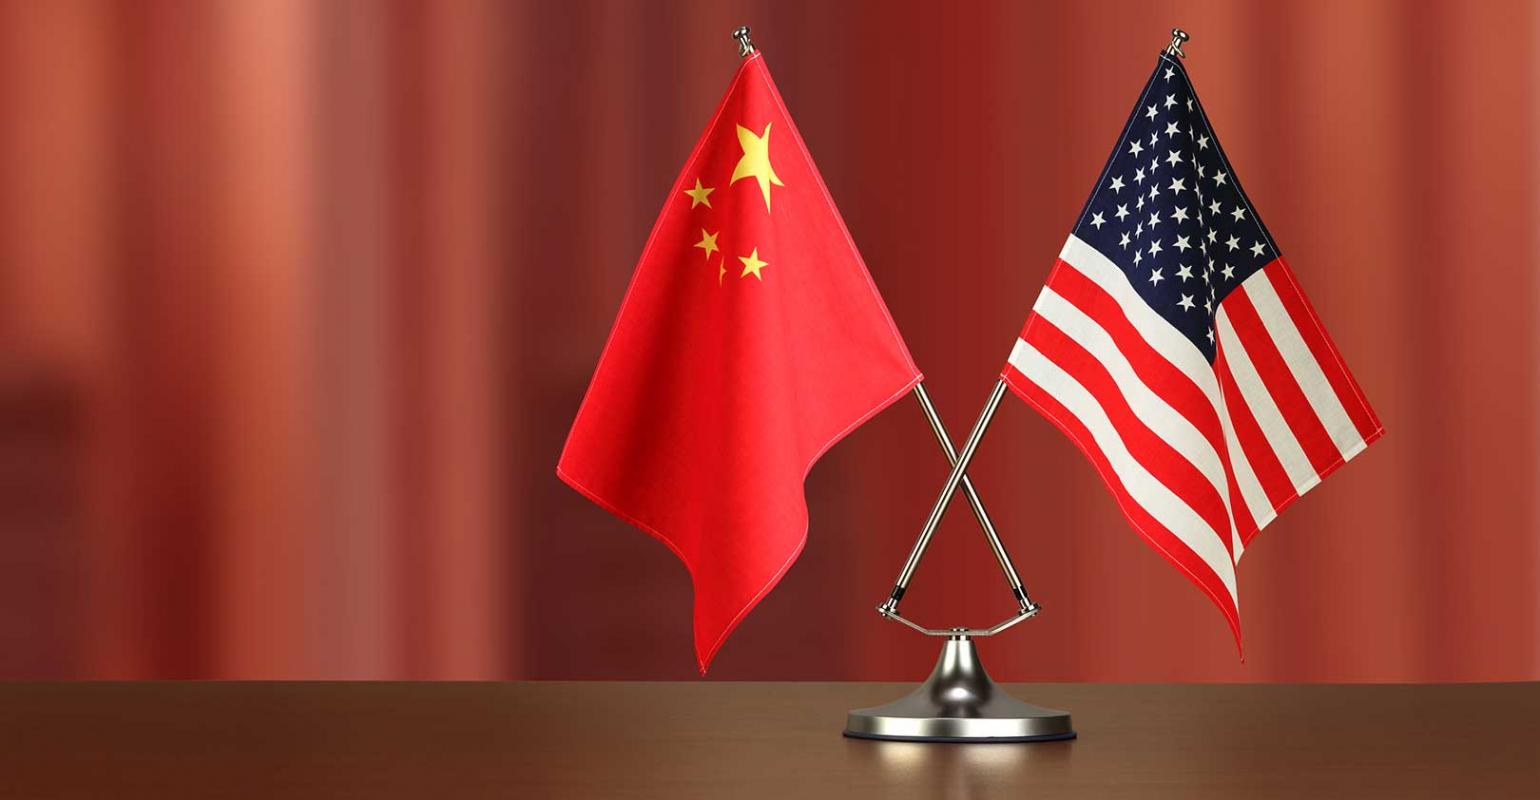 The Apparel Industry Not Happy With US-China “Phase One” Agreement